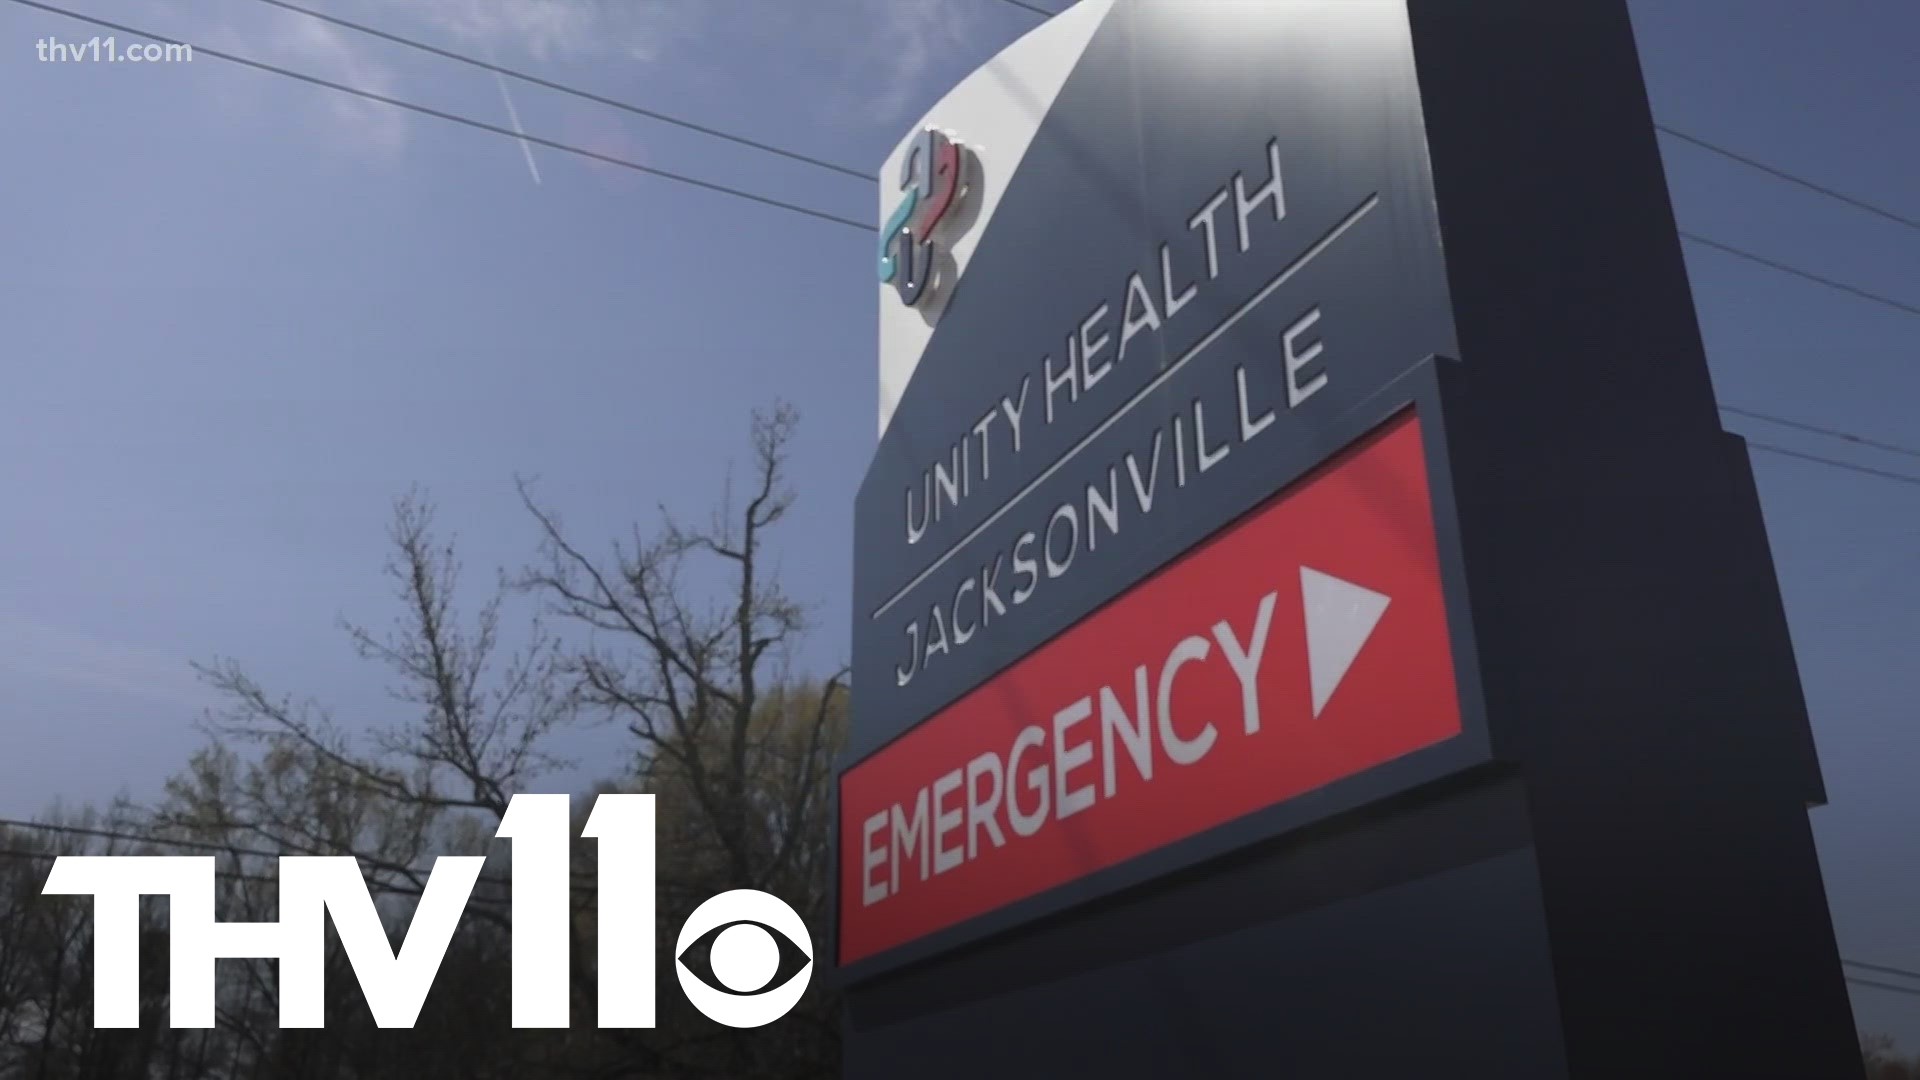 The City of Jacksonville lost its hospital years ago, but now has more options for healthcare with the opening of Unity Health.